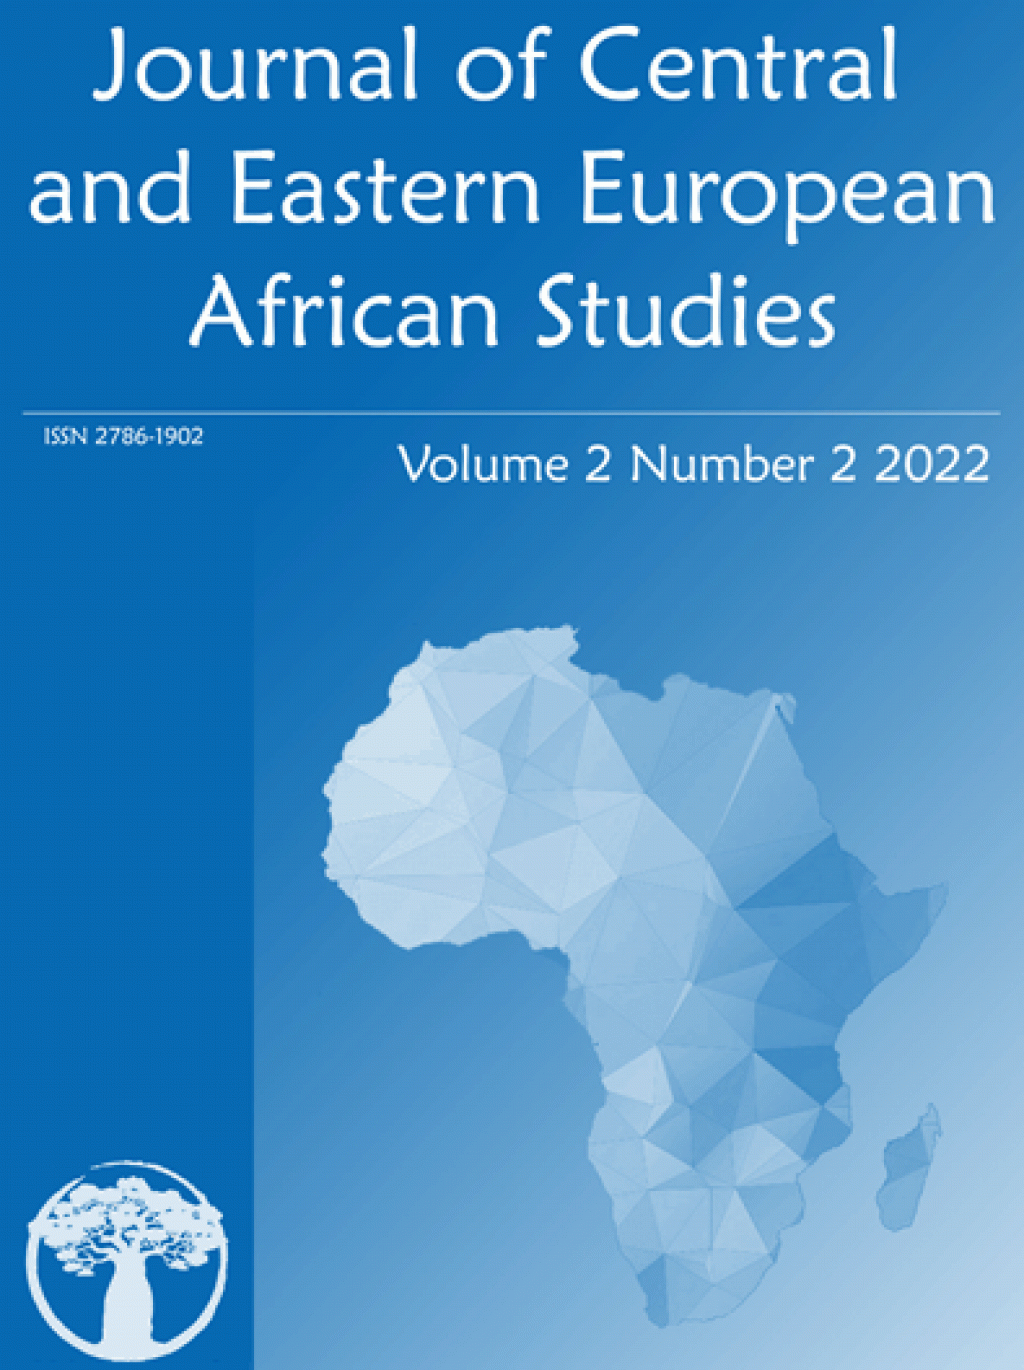 Journal of Central and Eastern European African Studies